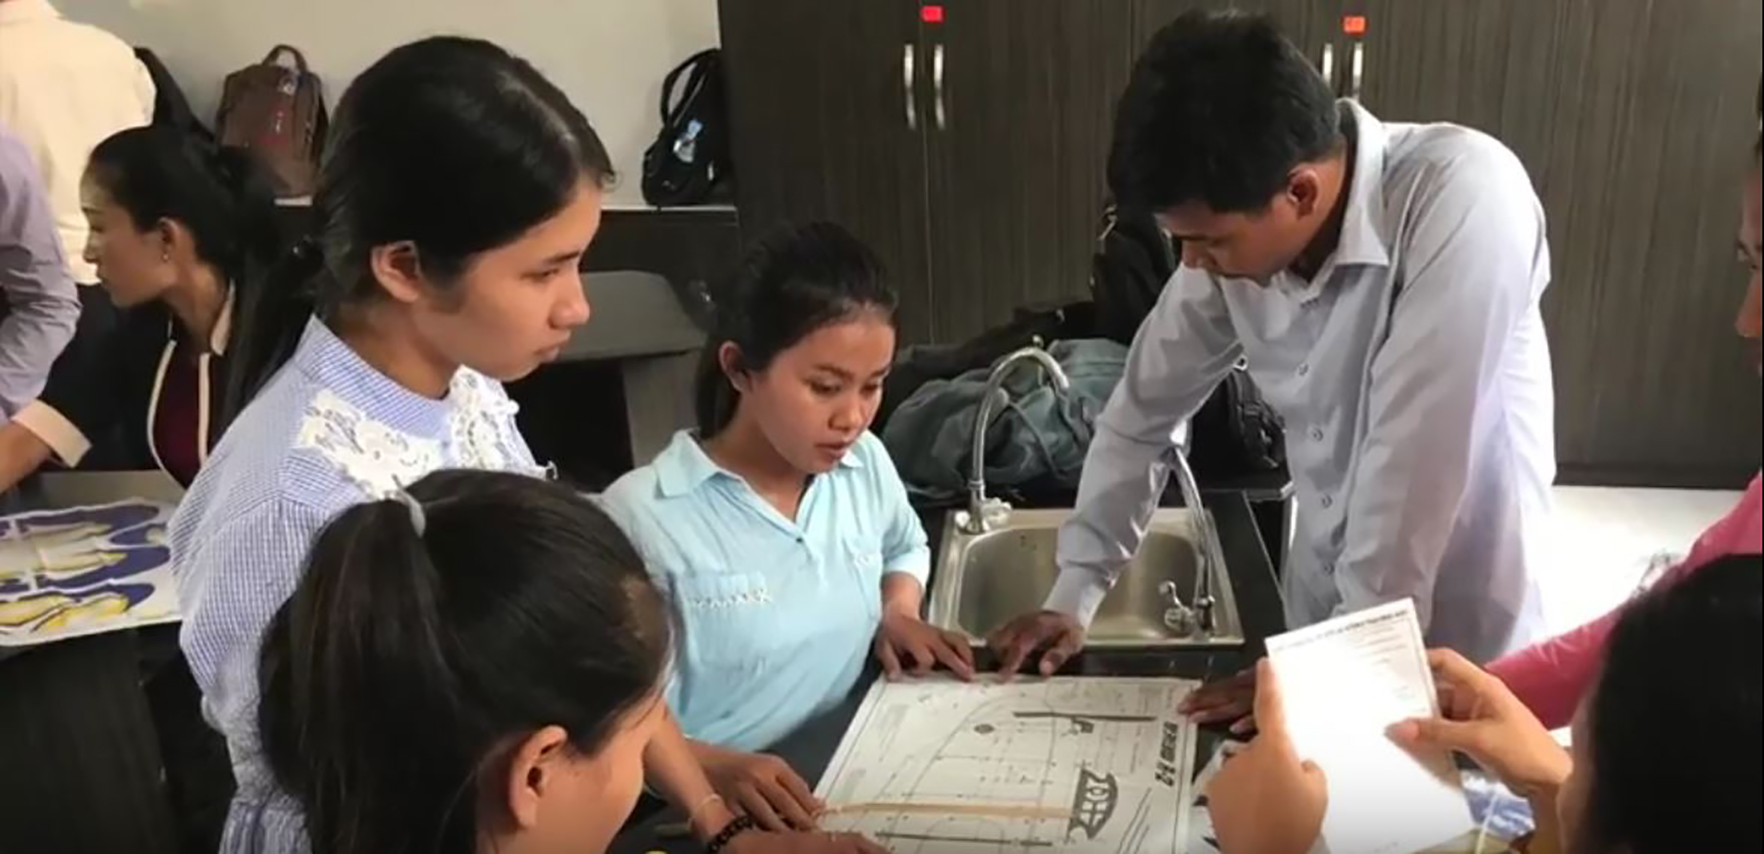 Students working on STEM projects in Cambodia